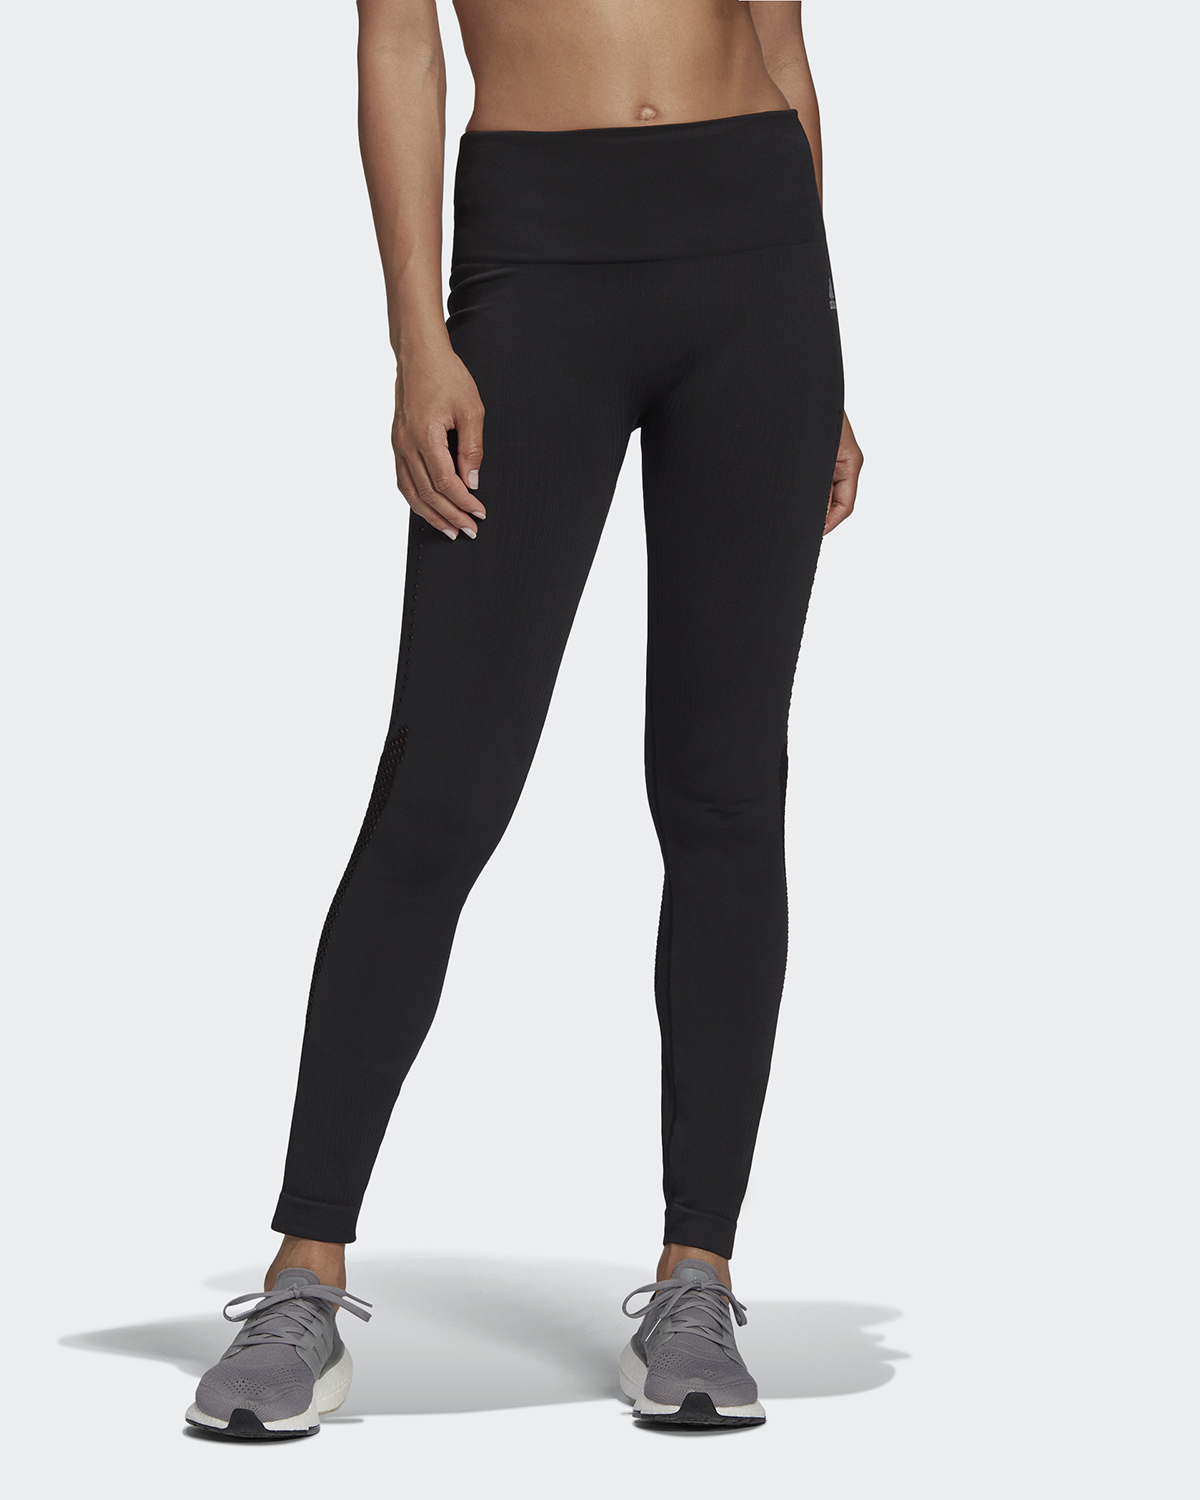 Athleta M Transcend Color Block 7/8 Tight Leggings Women's Medium Berry  Rose - $49 New With Tags - From Rob